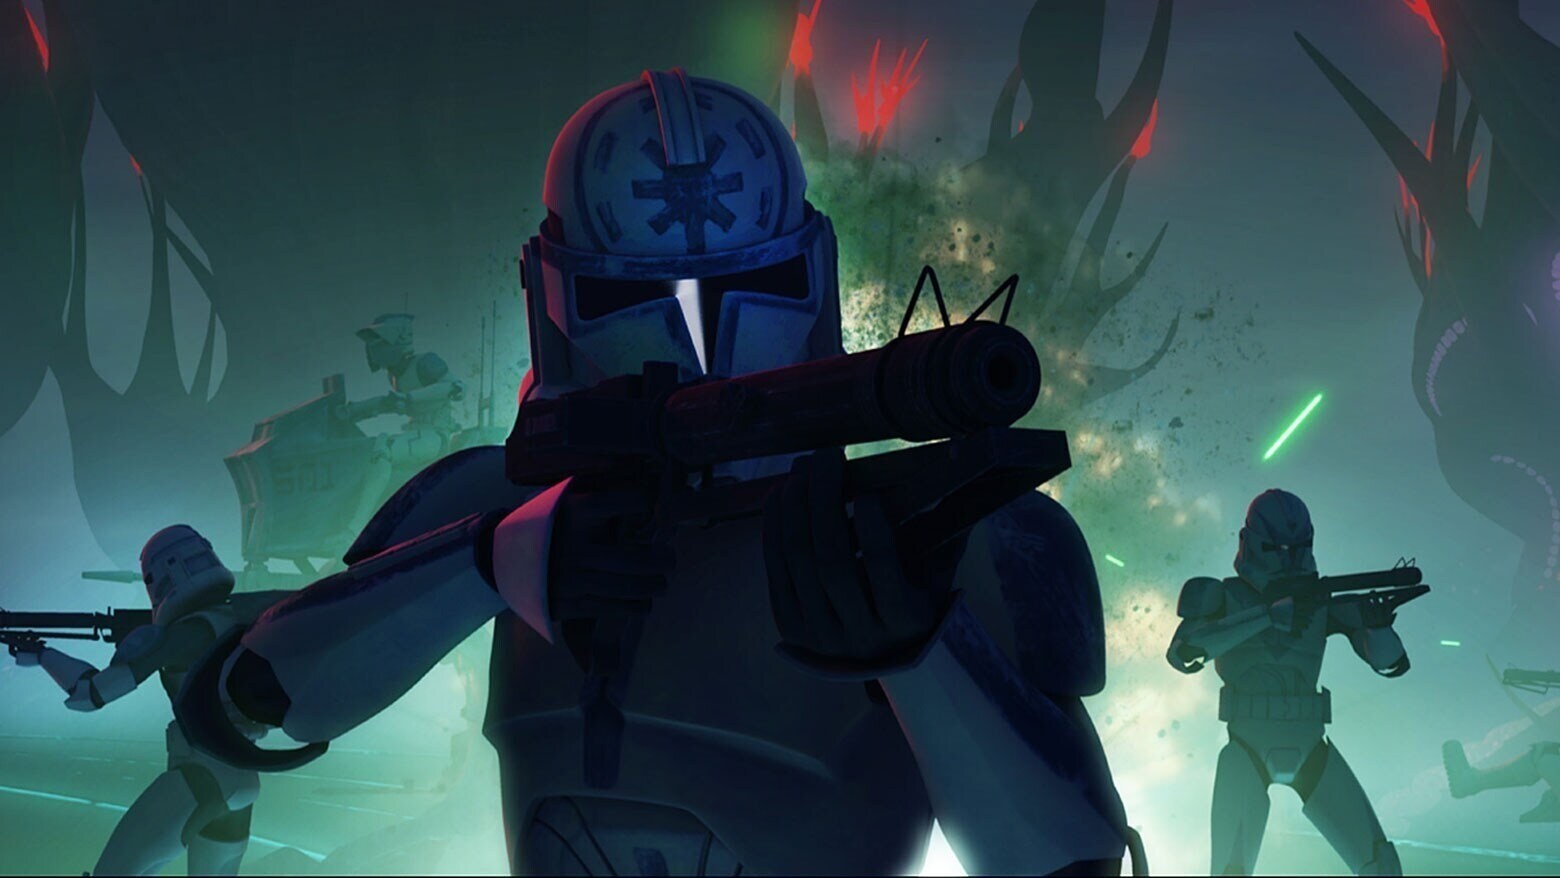 Three clone troopers in a battle on Umbara